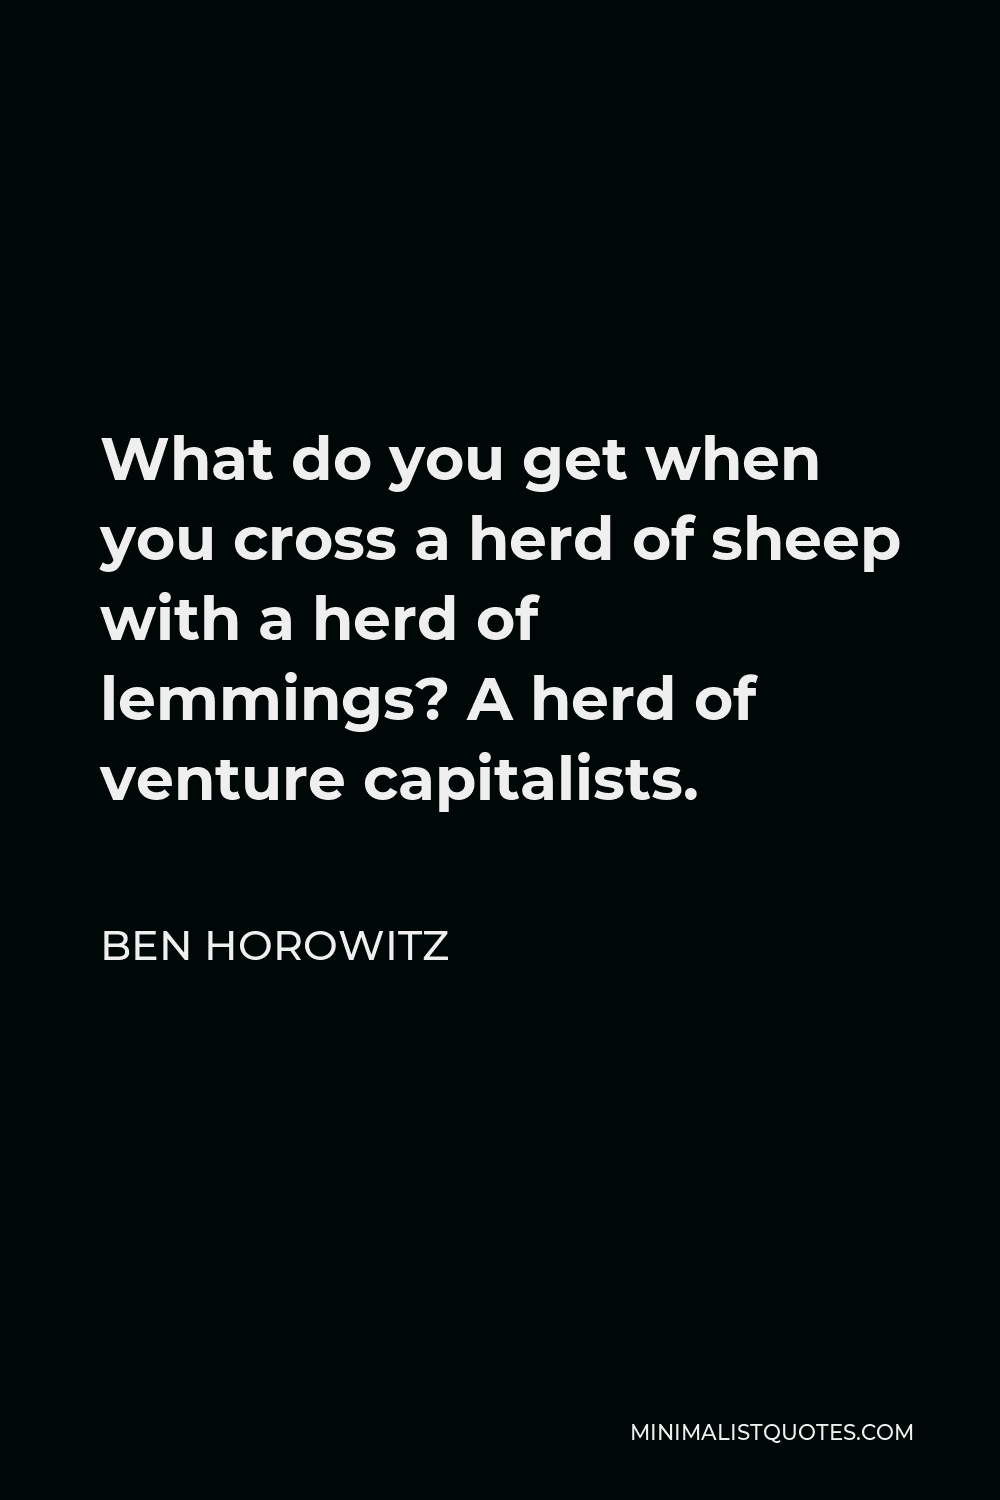 Ben Horowitz Quote - What do you get when you cross a herd of sheep with a herd of lemmings? A herd of venture capitalists.